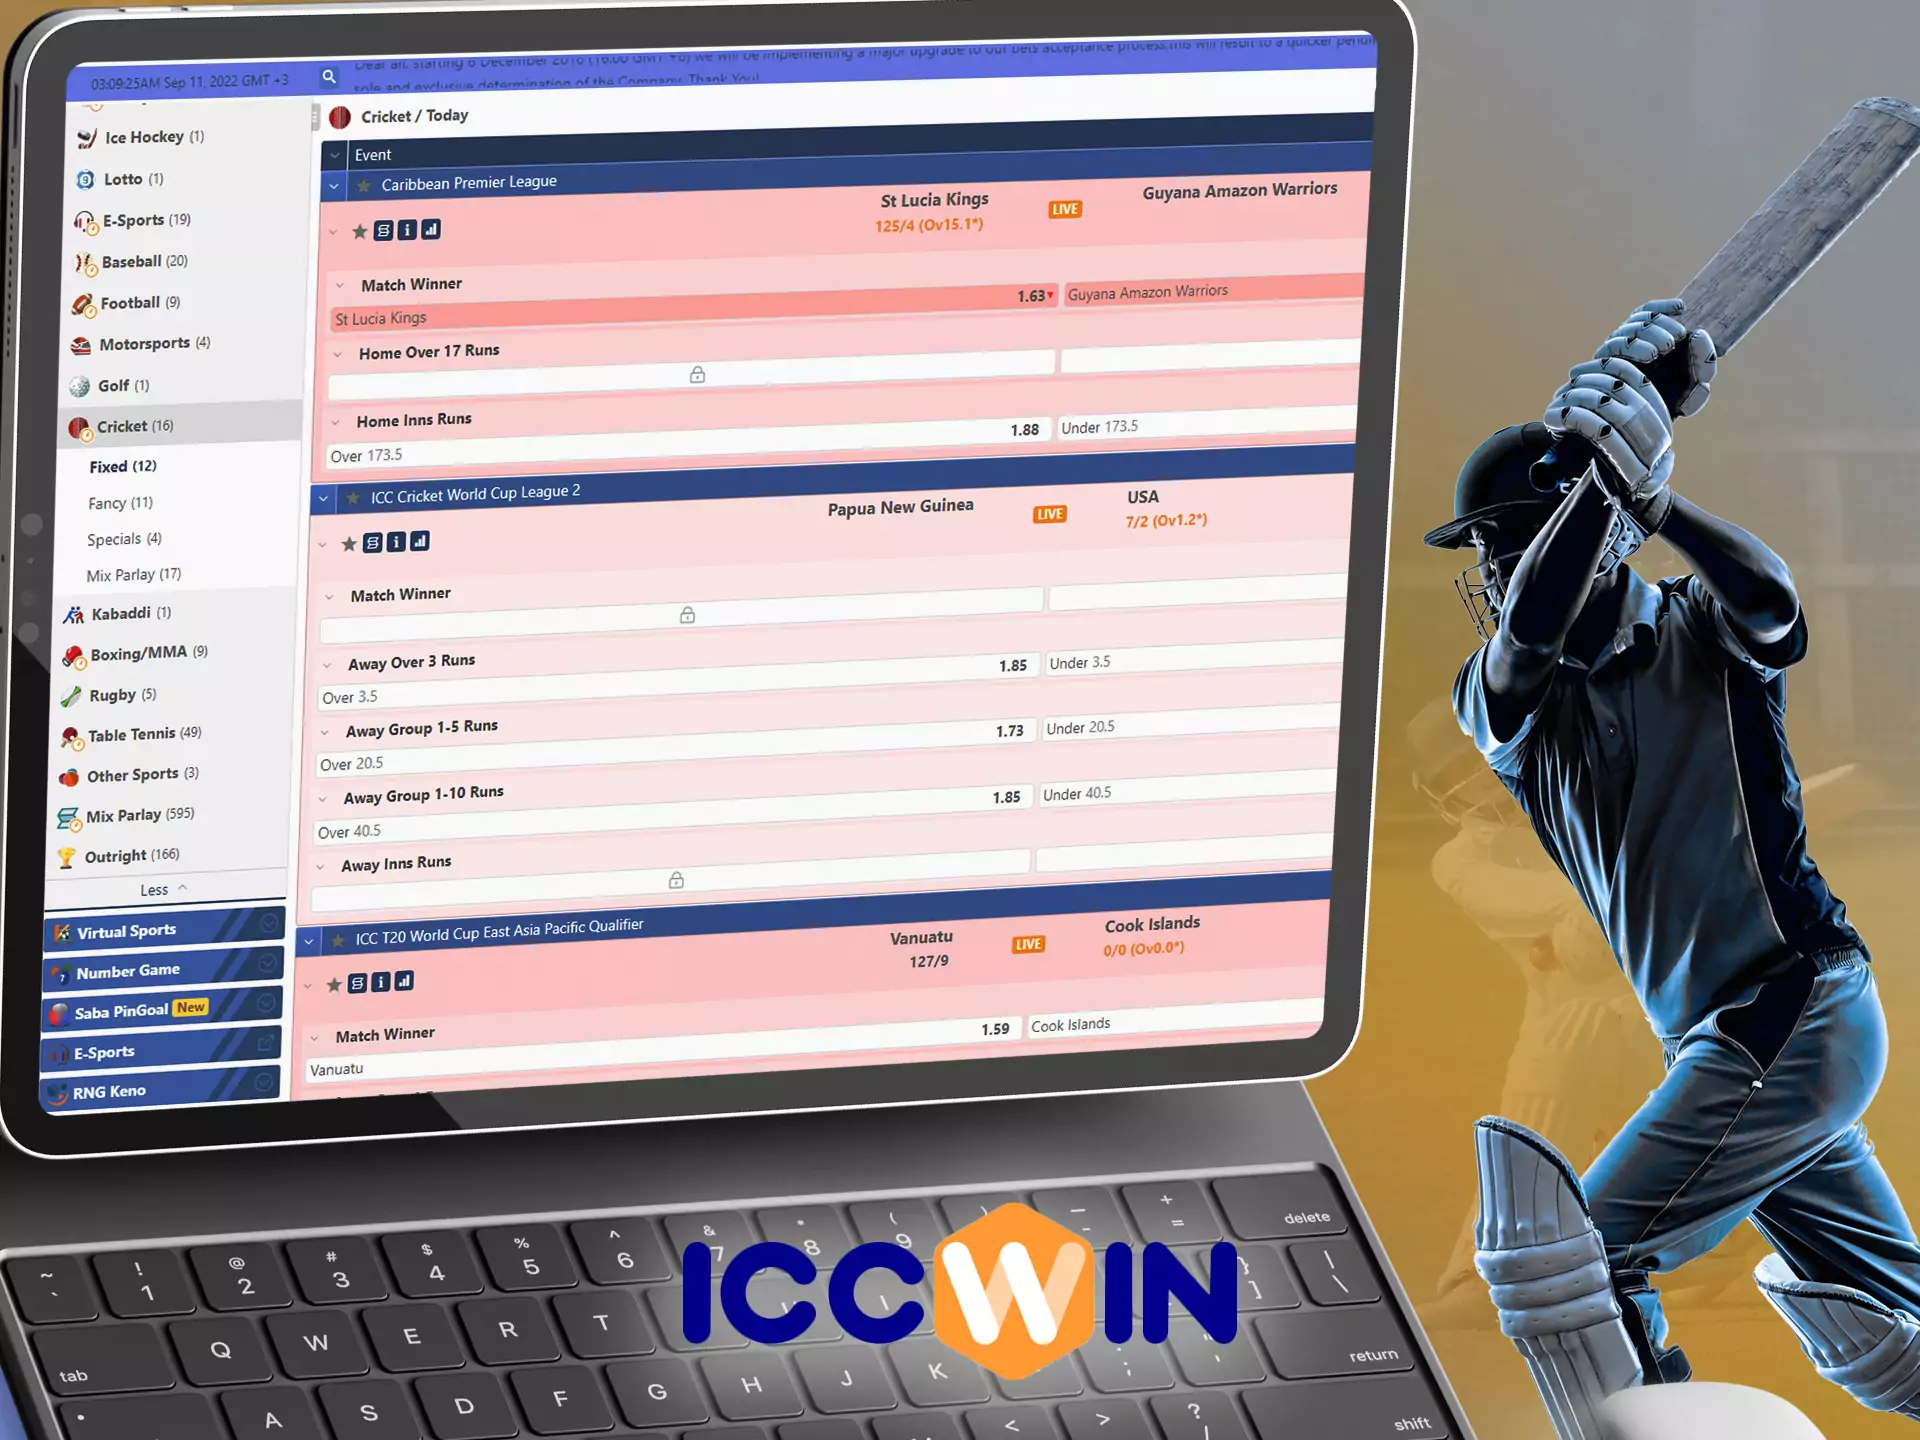 In the sportsbook, you find a wide range of matches available for betting on ICCWin.